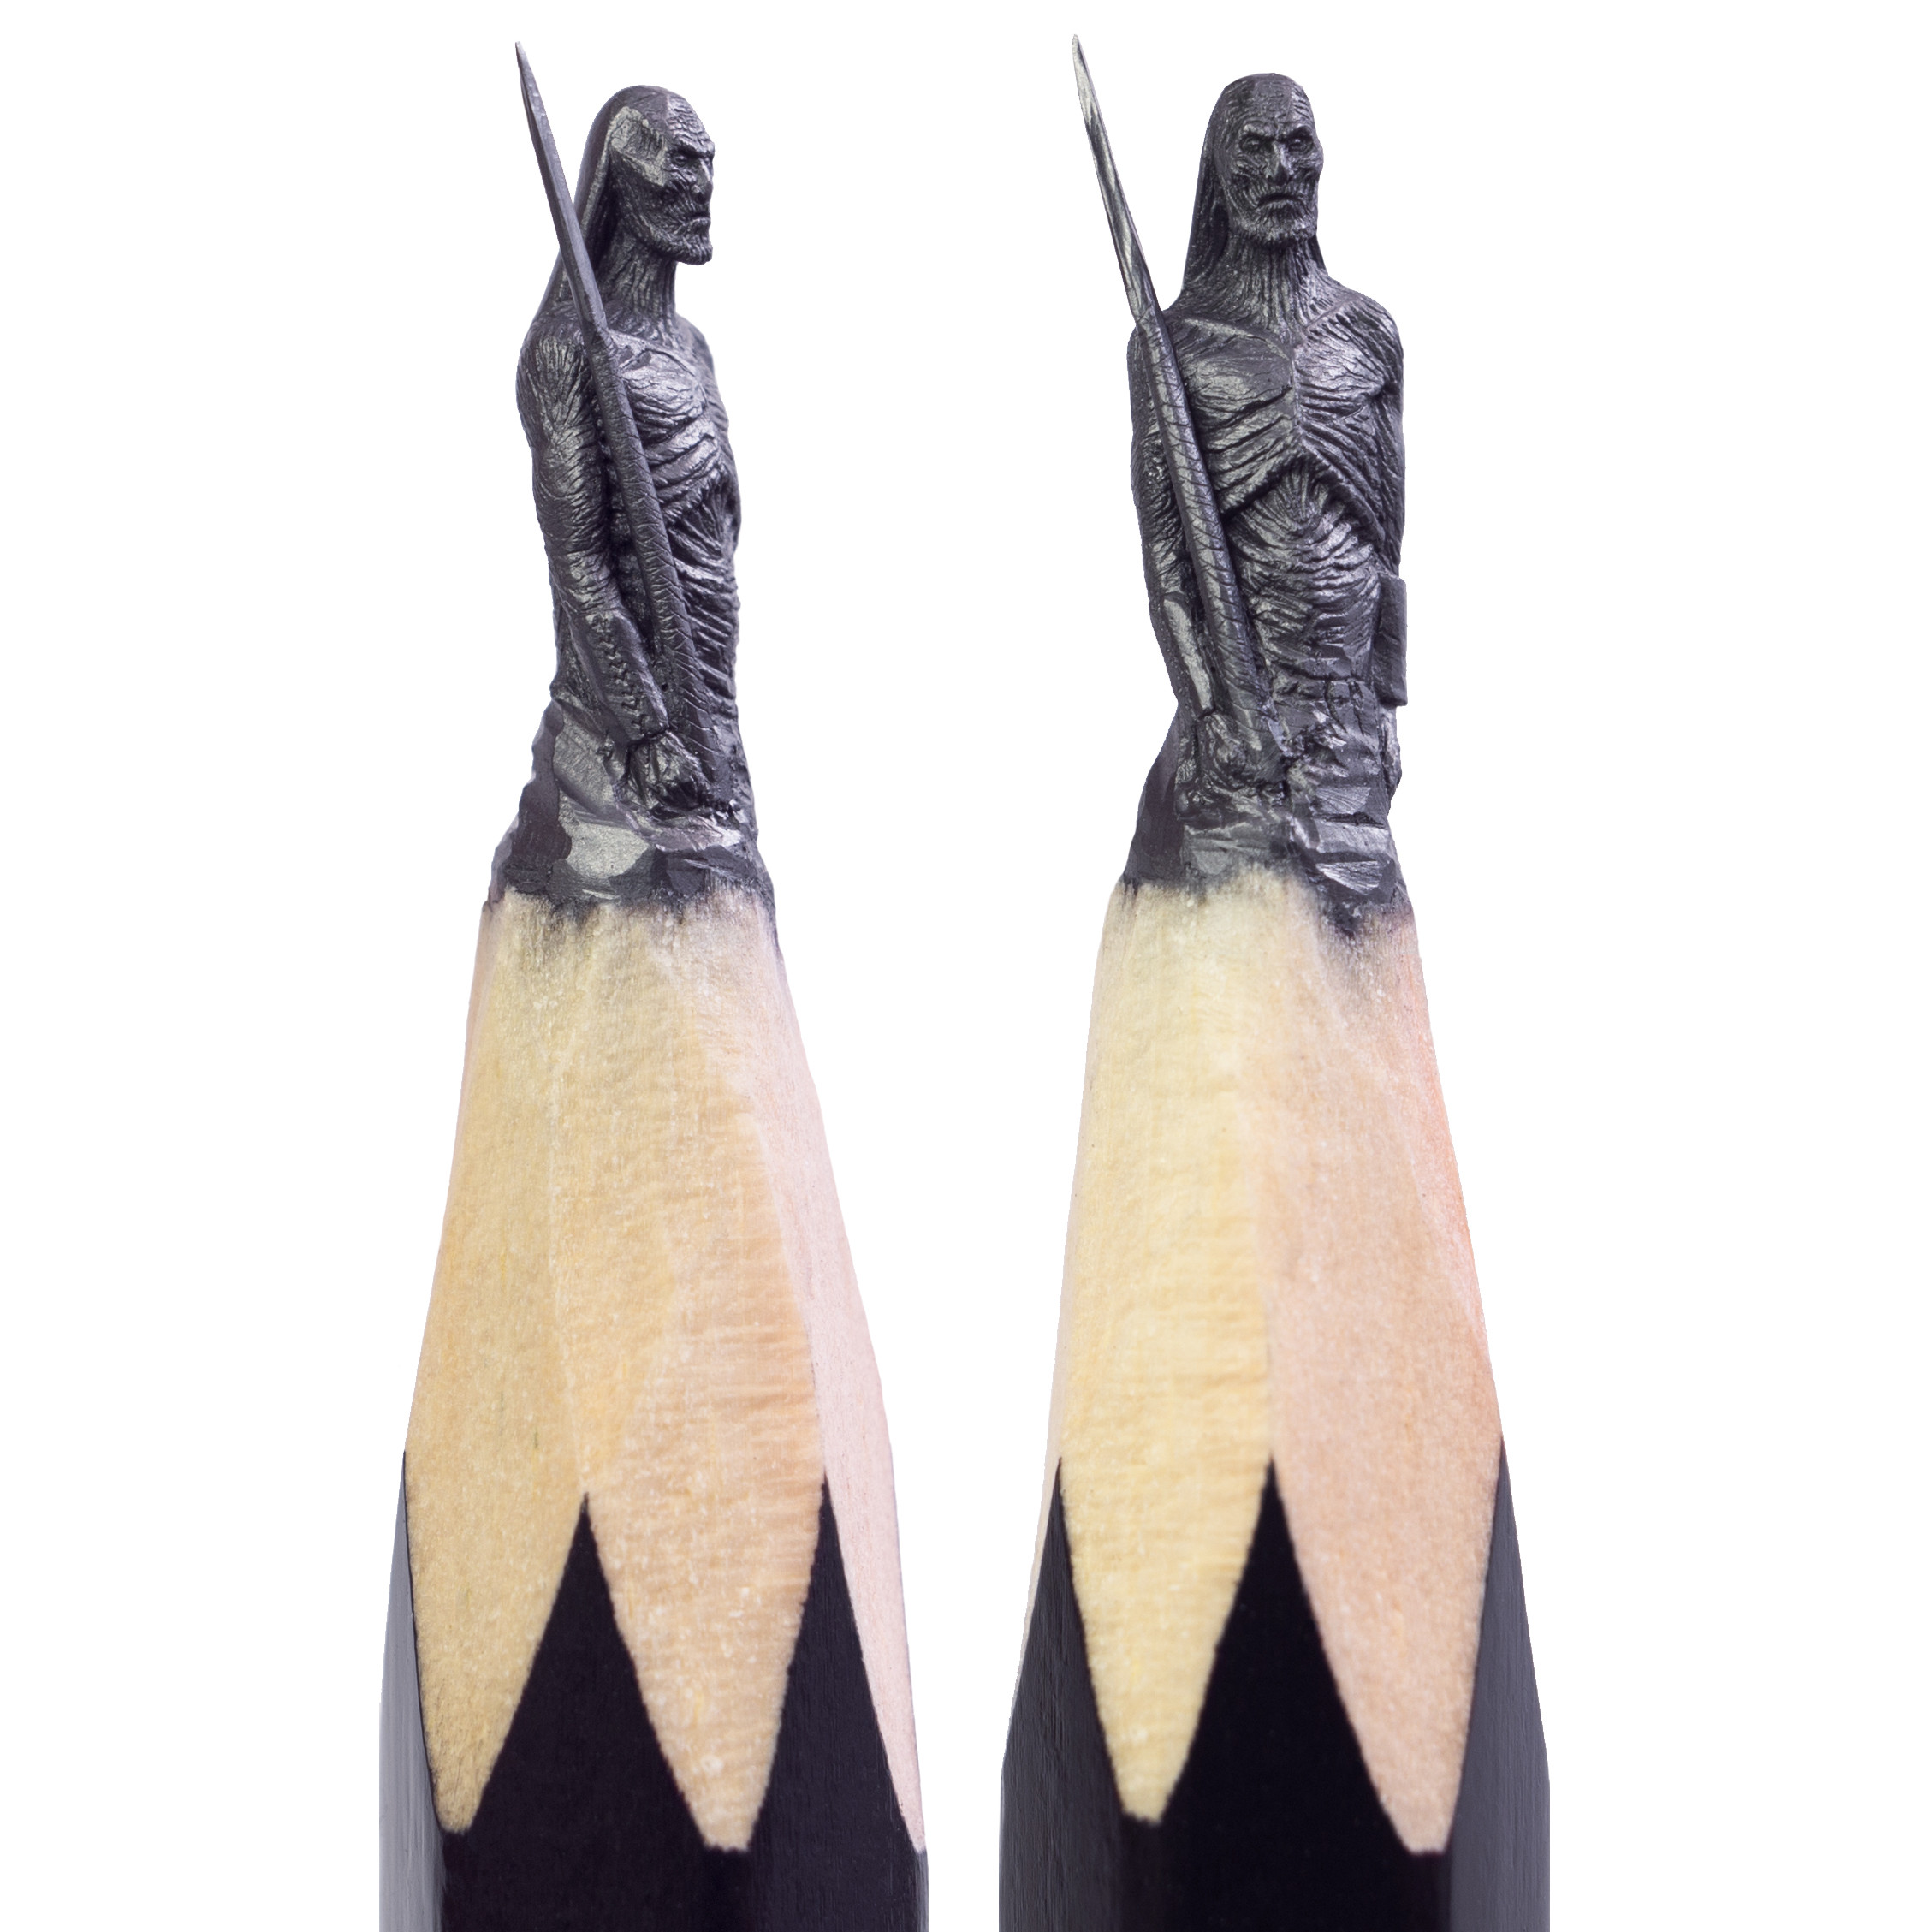 GAME OF THRONES Pencil Microscupture Exhibition - White Walker